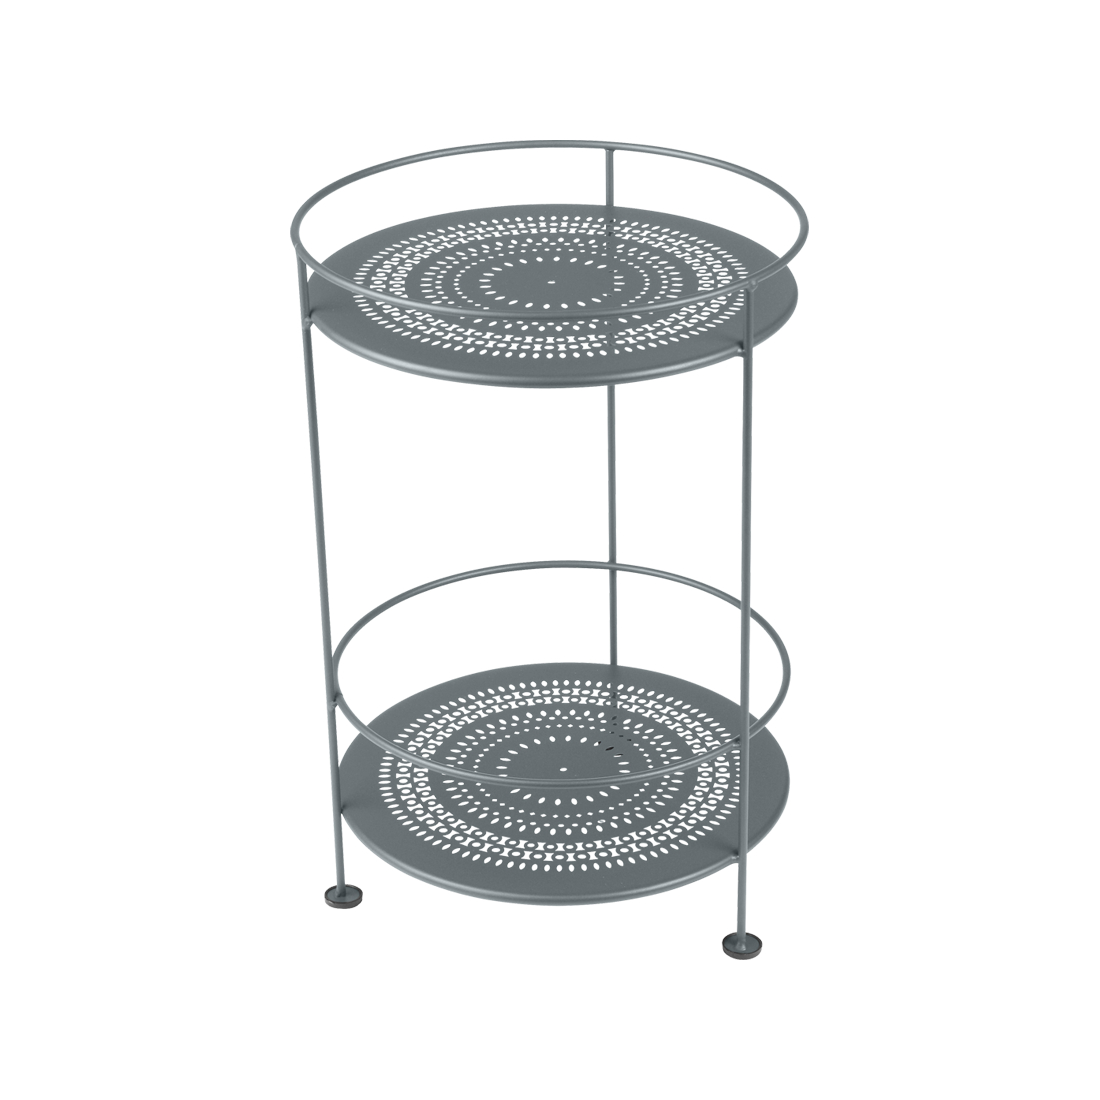 Guinguette Side Table with Perforated Top